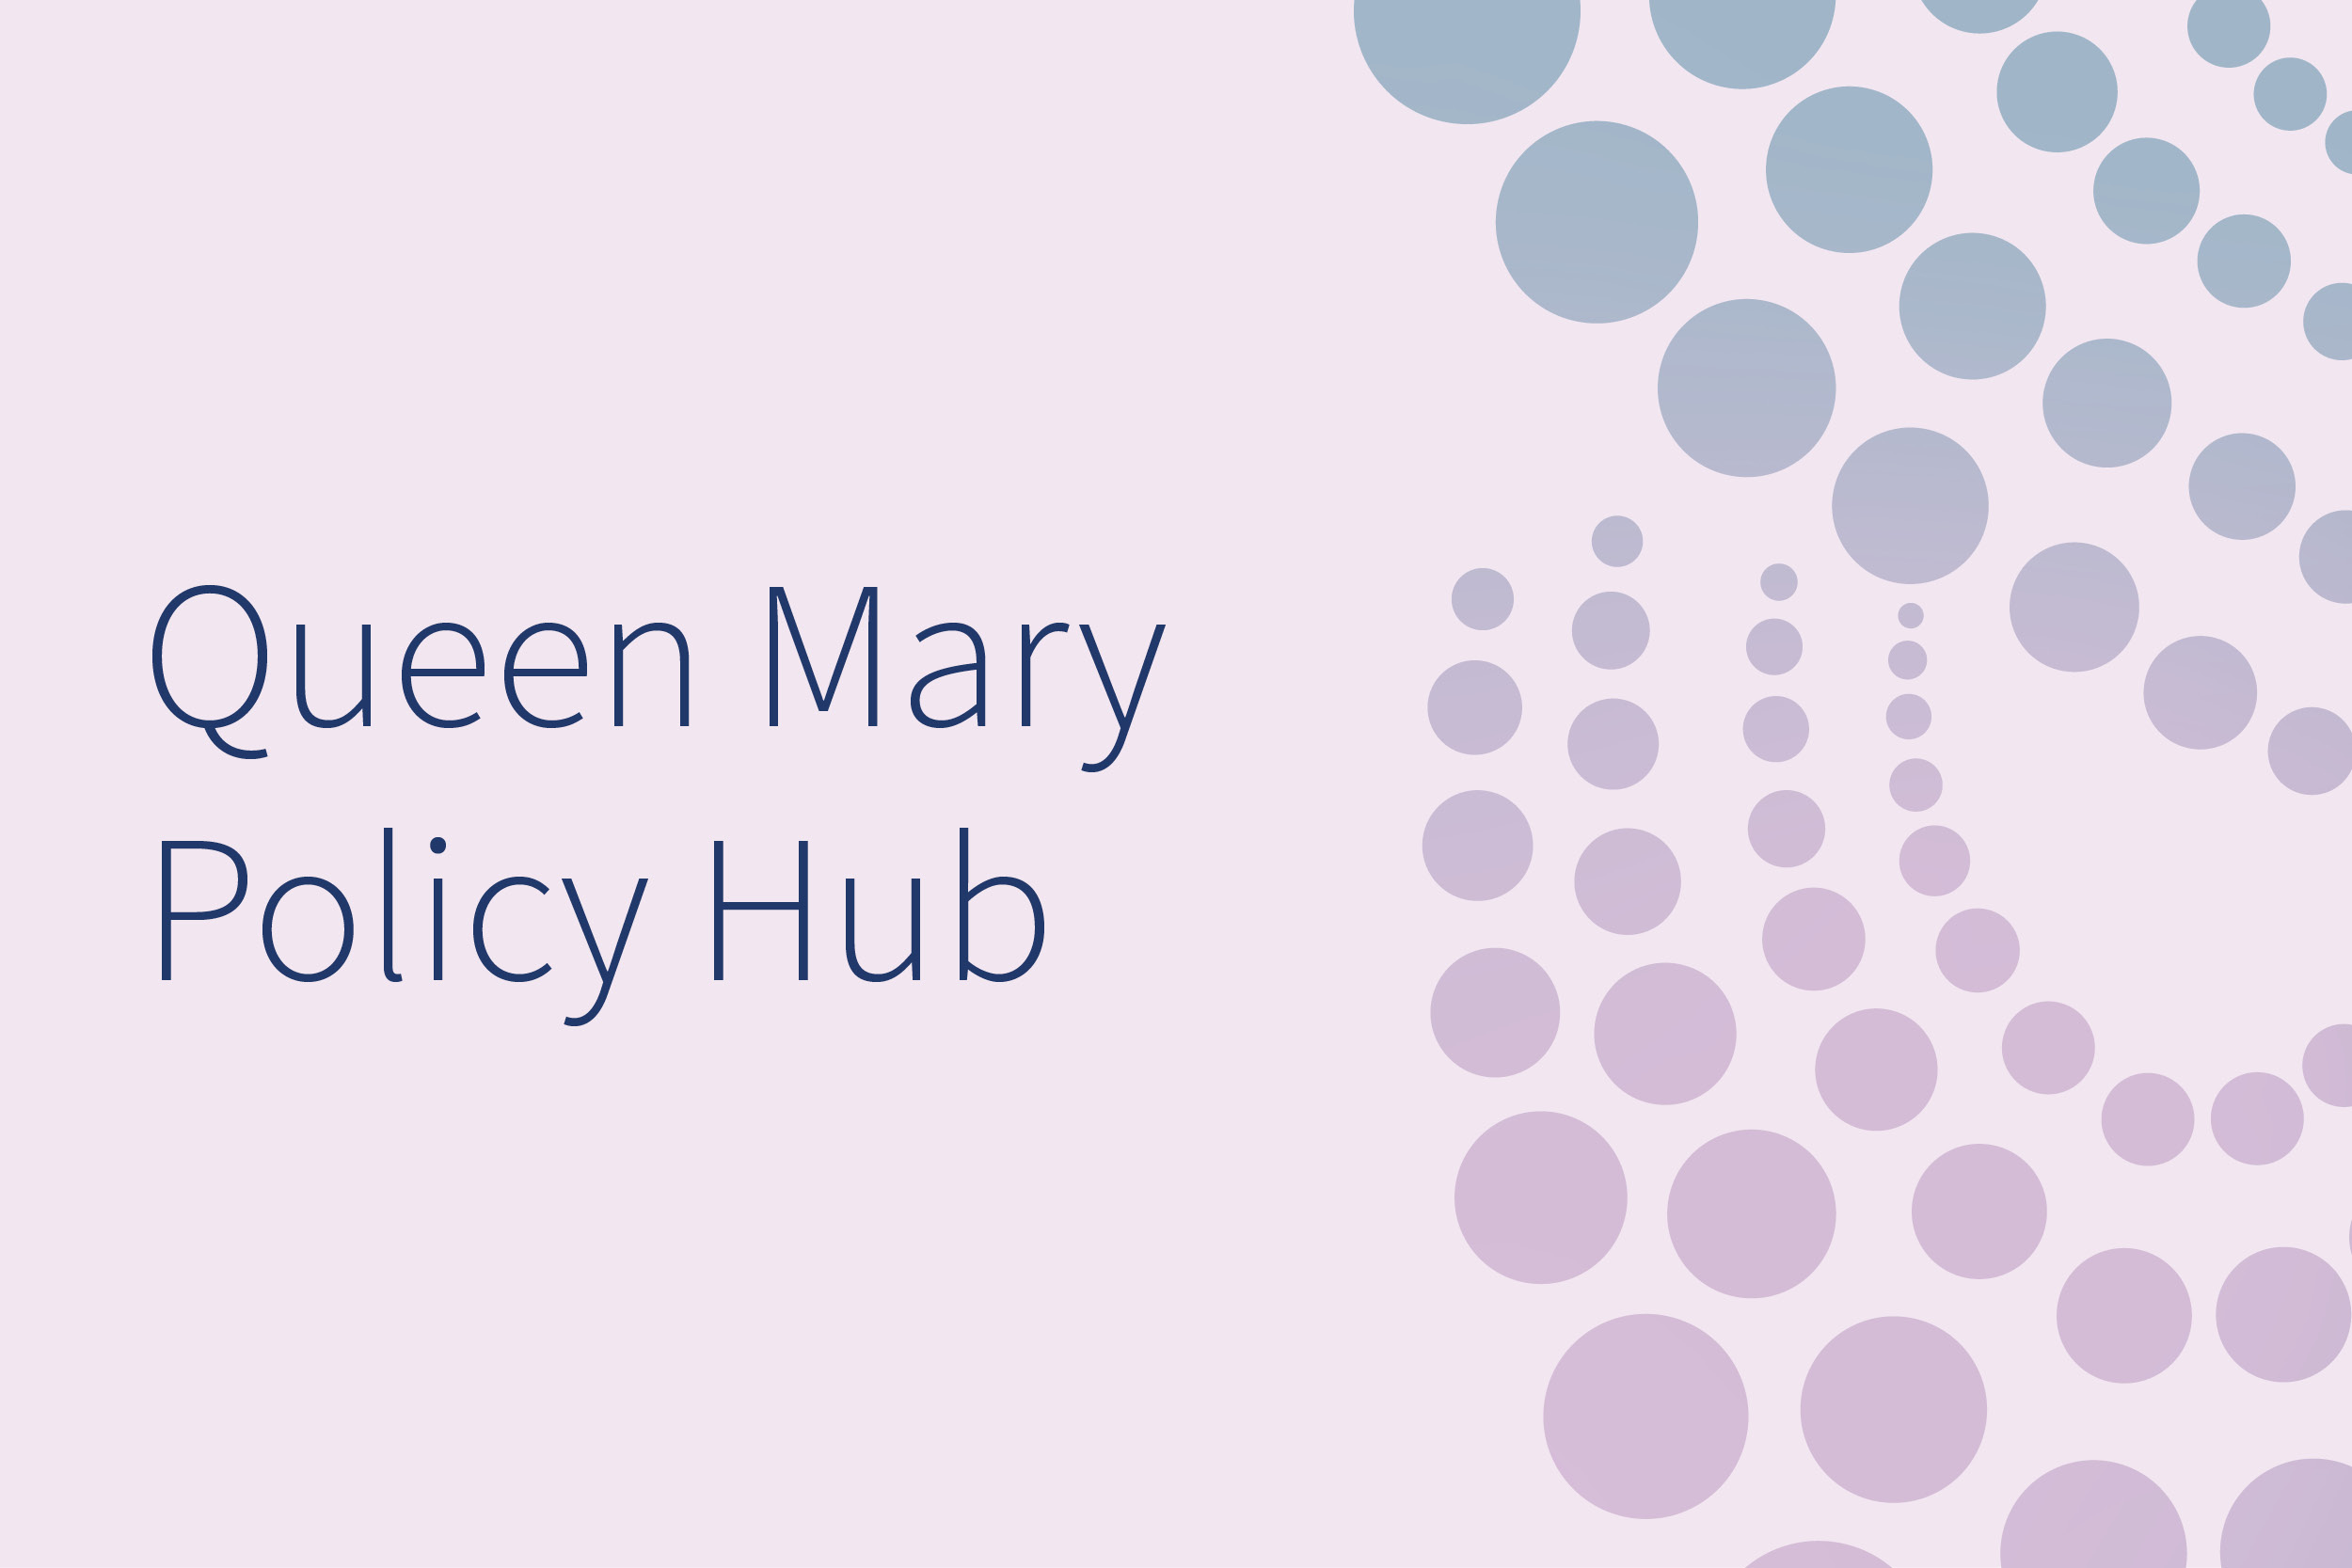 Queen Mary Policy Hub